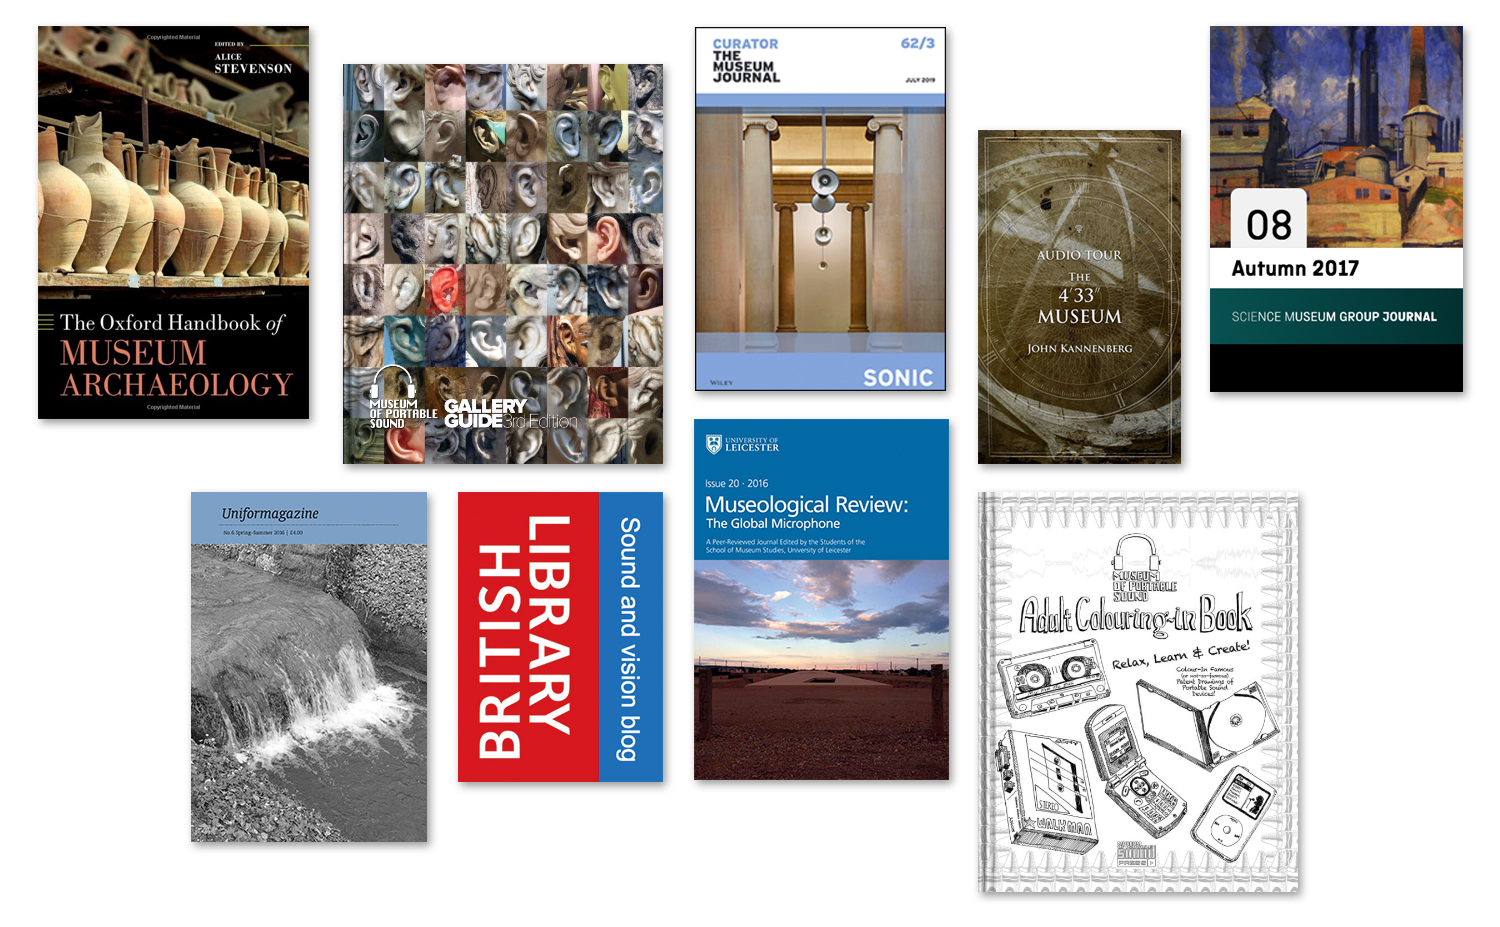 A collection of covers of books, magazines, and journals that have publiched content by our Museum.